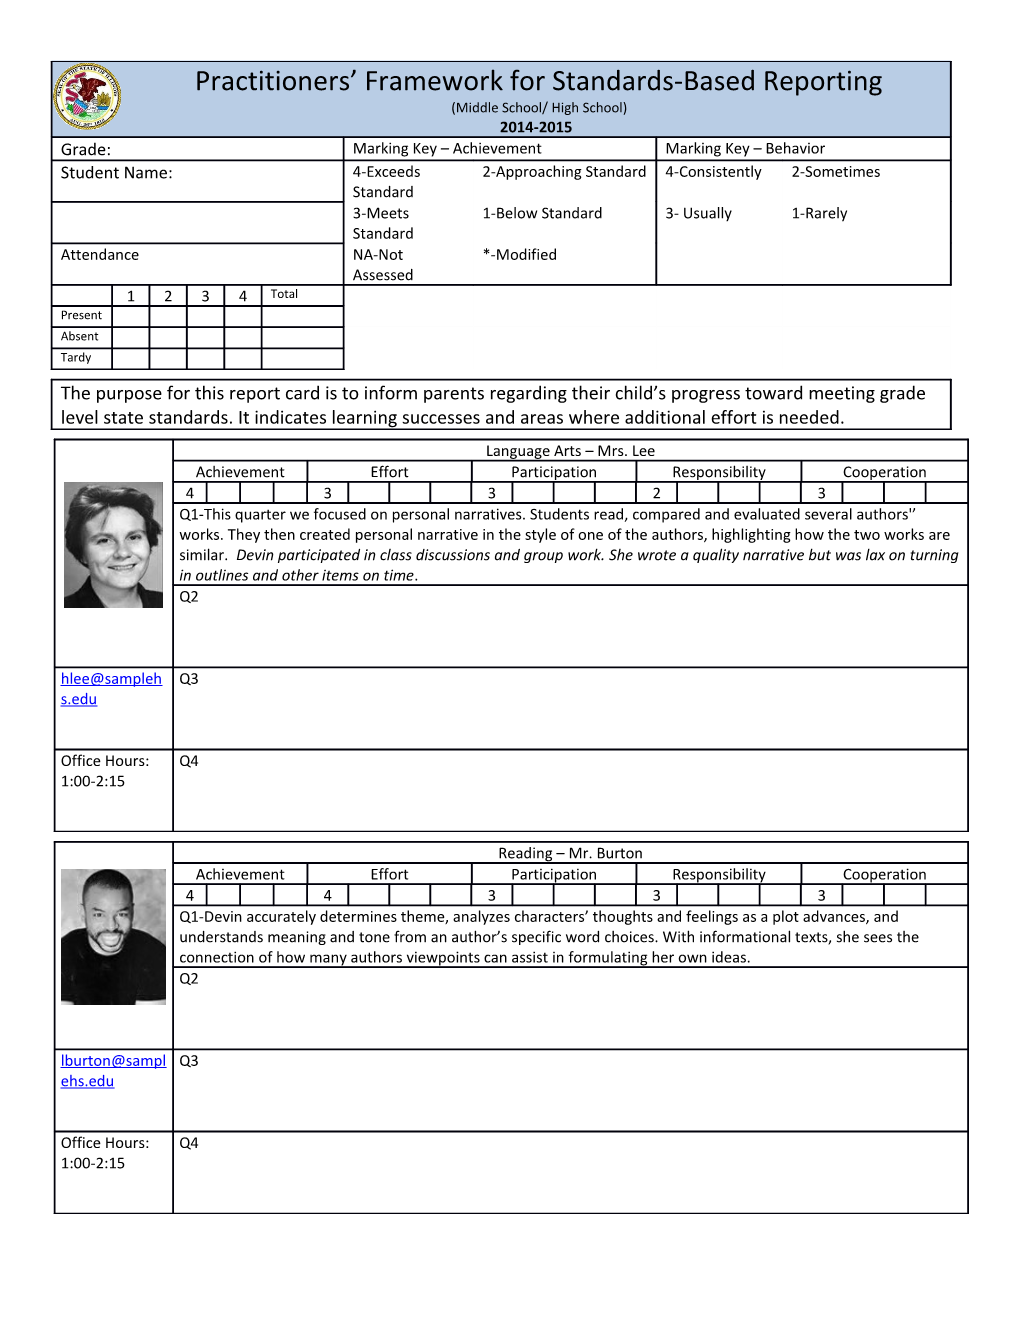 This Sample Is Based on an Example in Developing Standards-Based Report Cards by Tom R